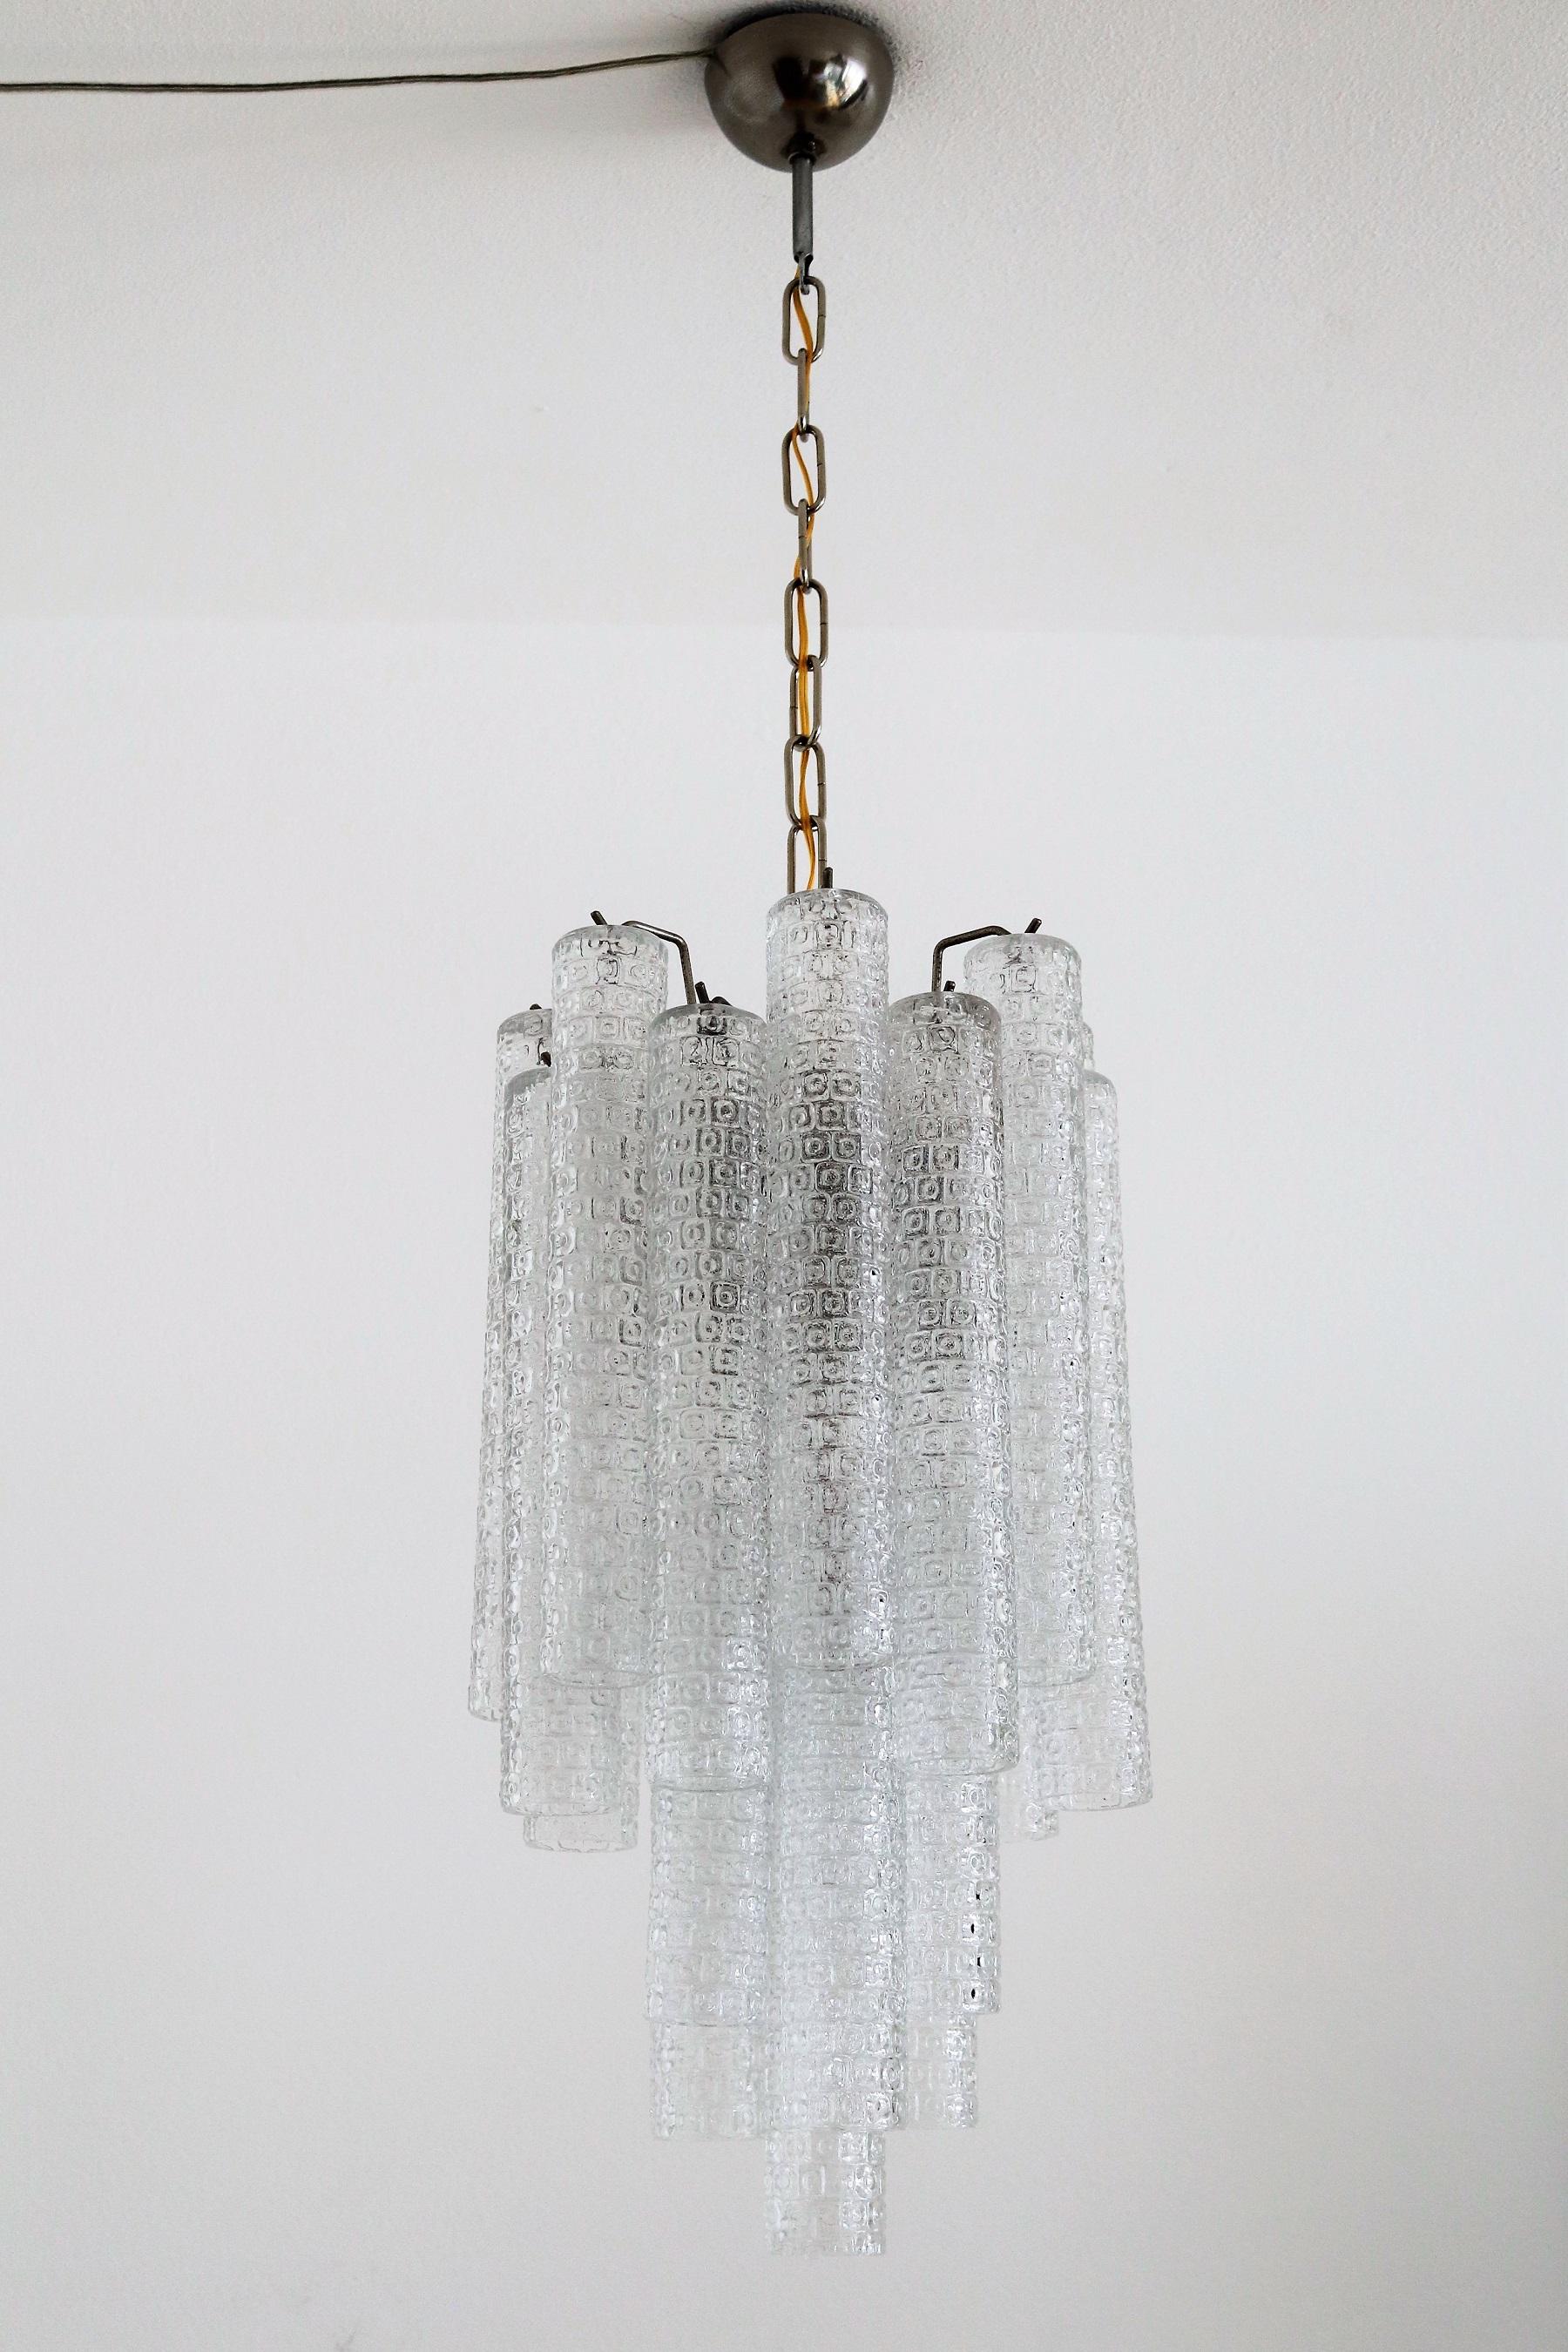 Italian Midcentury Murano Glass Crystal Tube Chandelier by Venini, 1950s For Sale 11